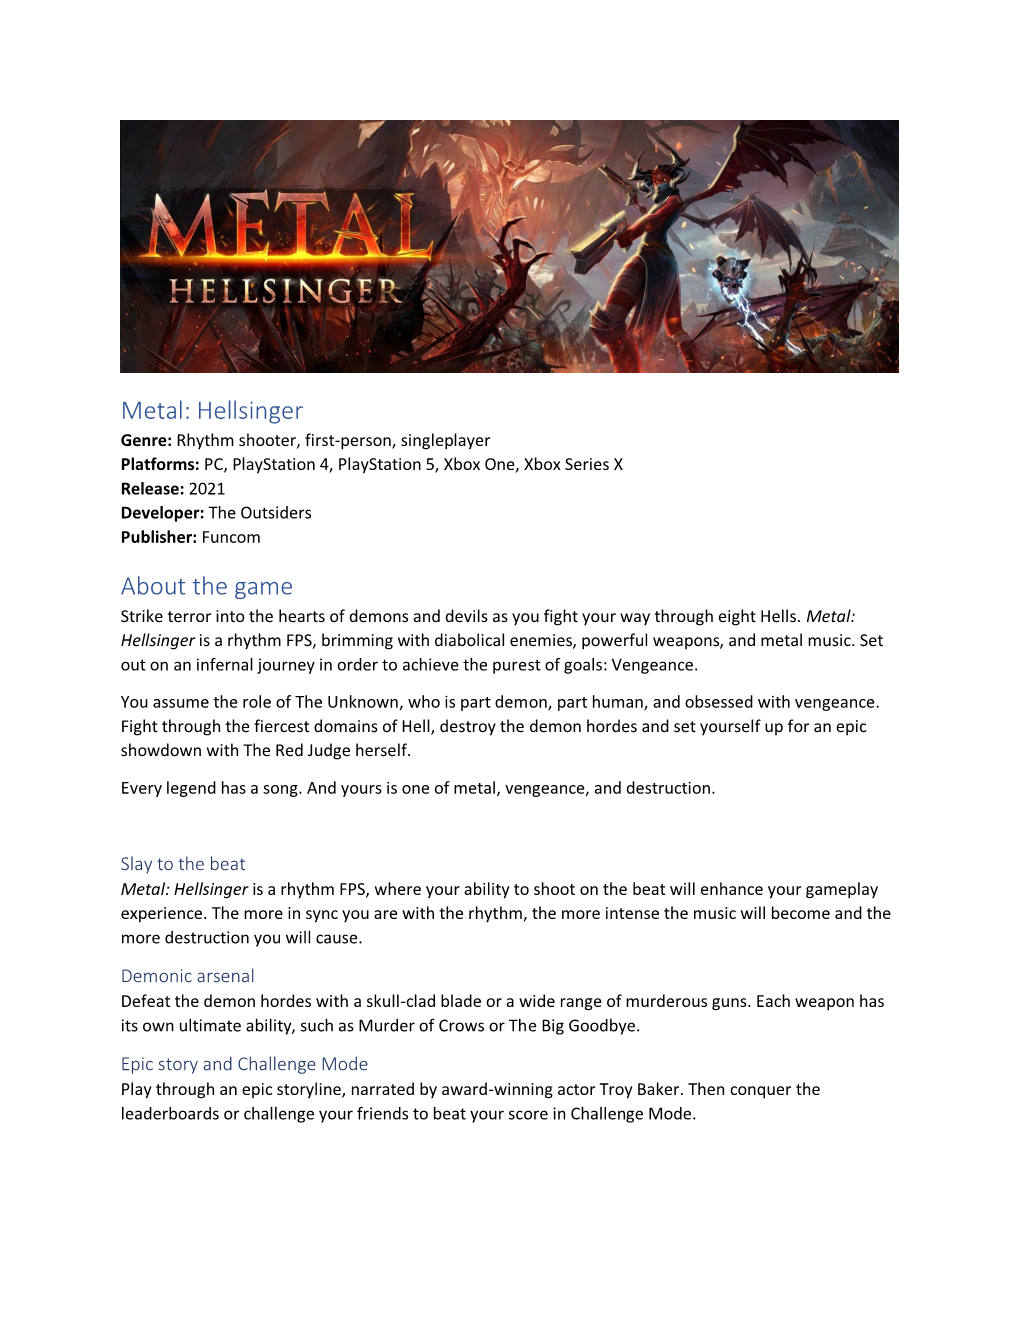 Metal: Hellsinger About the Game